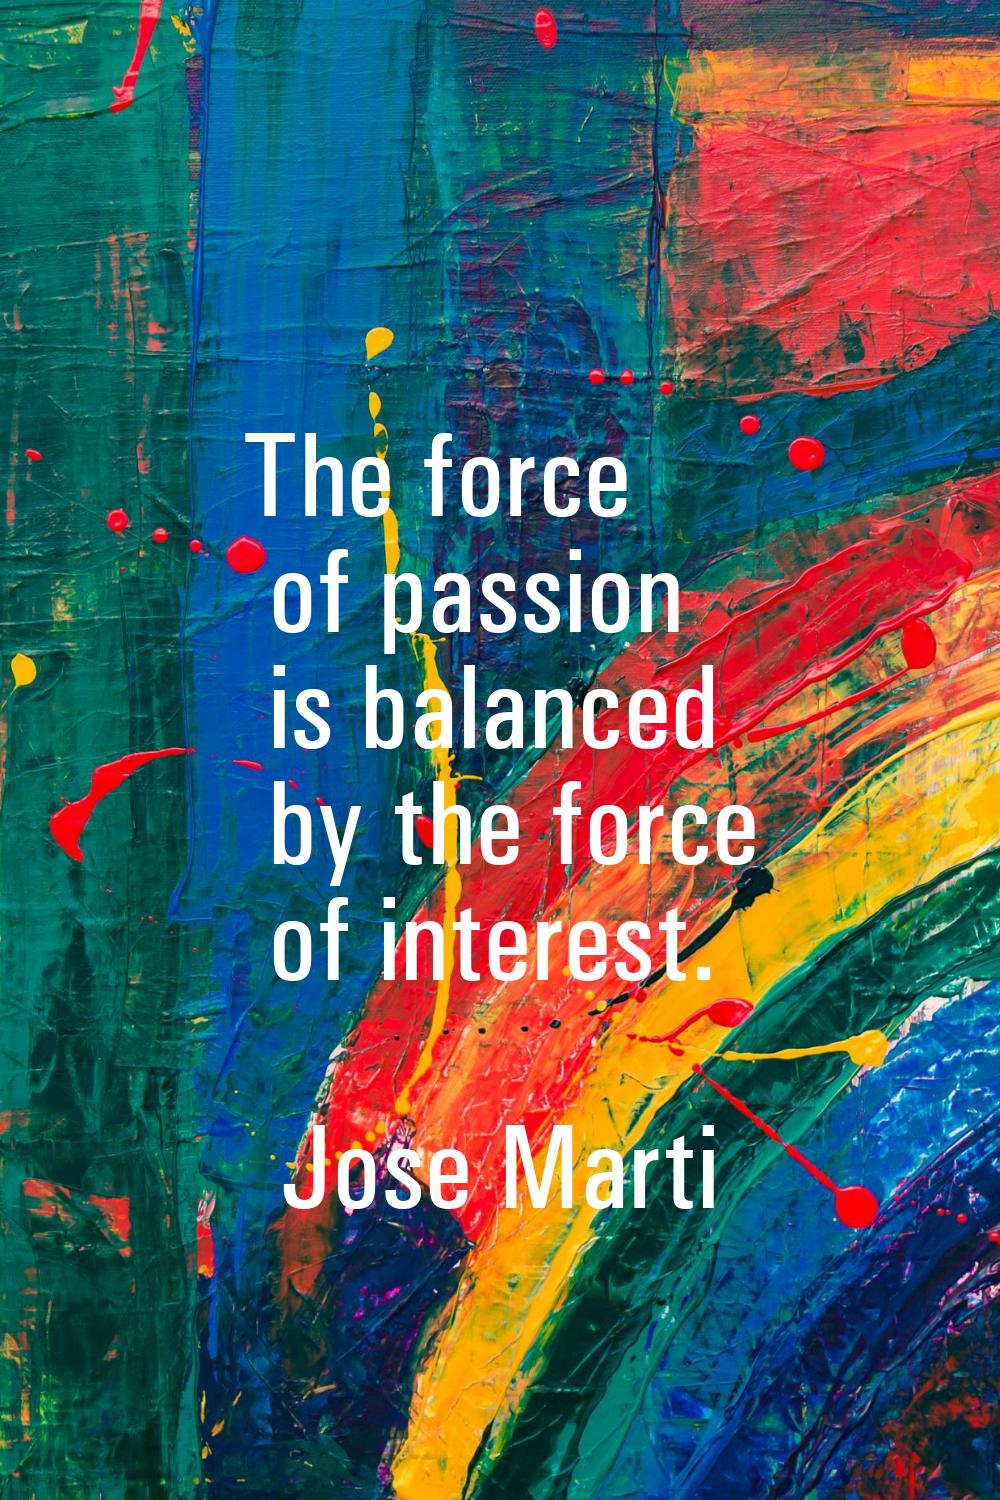 The force of passion is balanced by the force of interest.